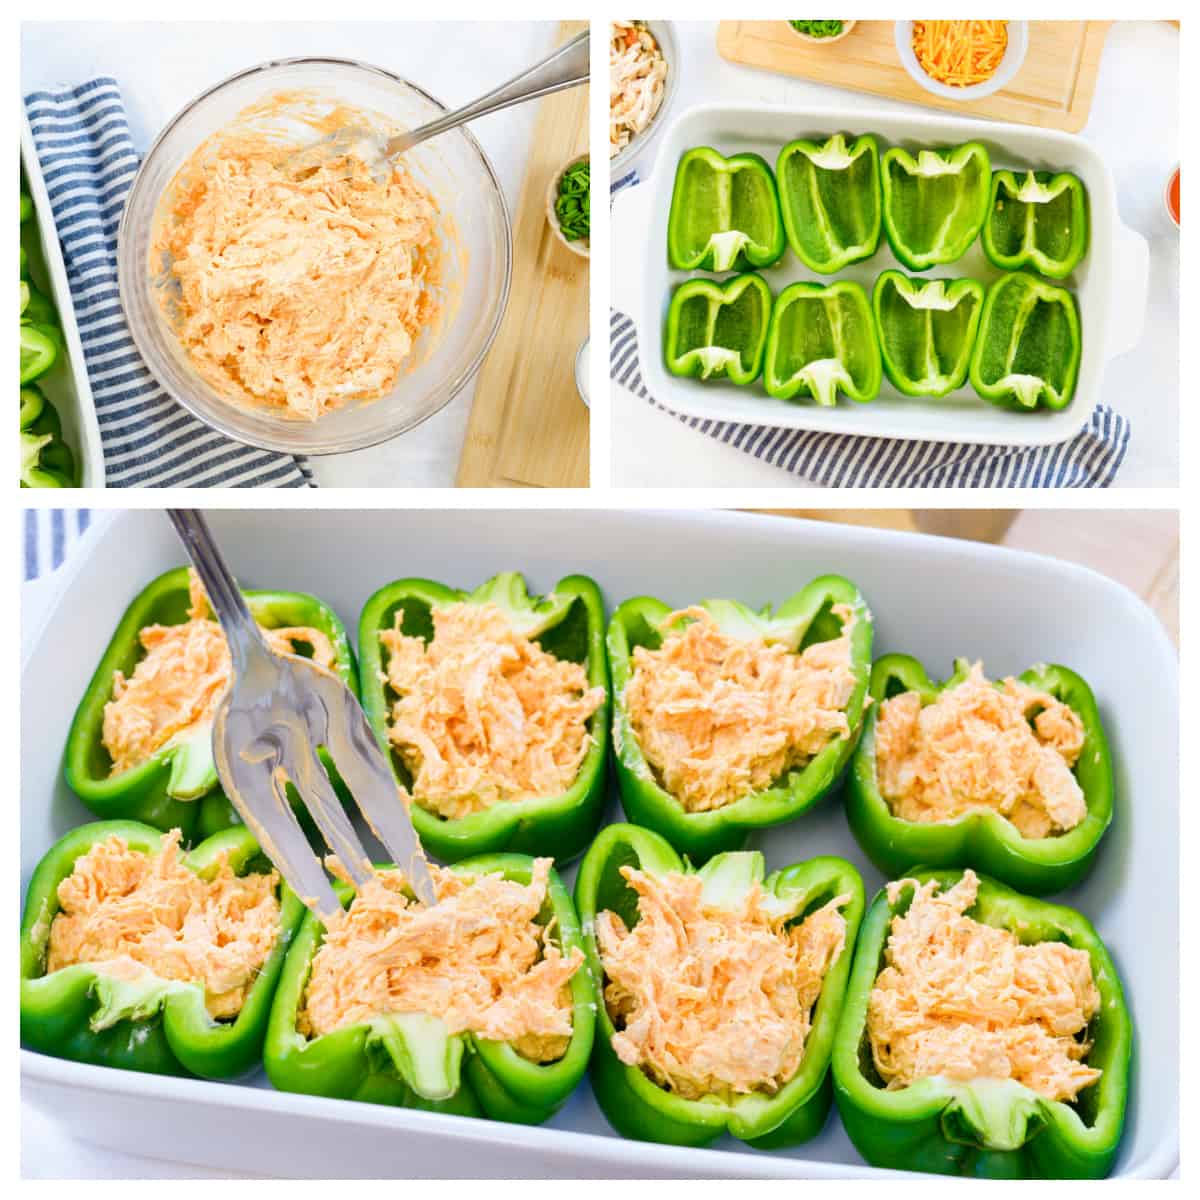 Collage showing how to make buffalo chicken stuffed peppers.